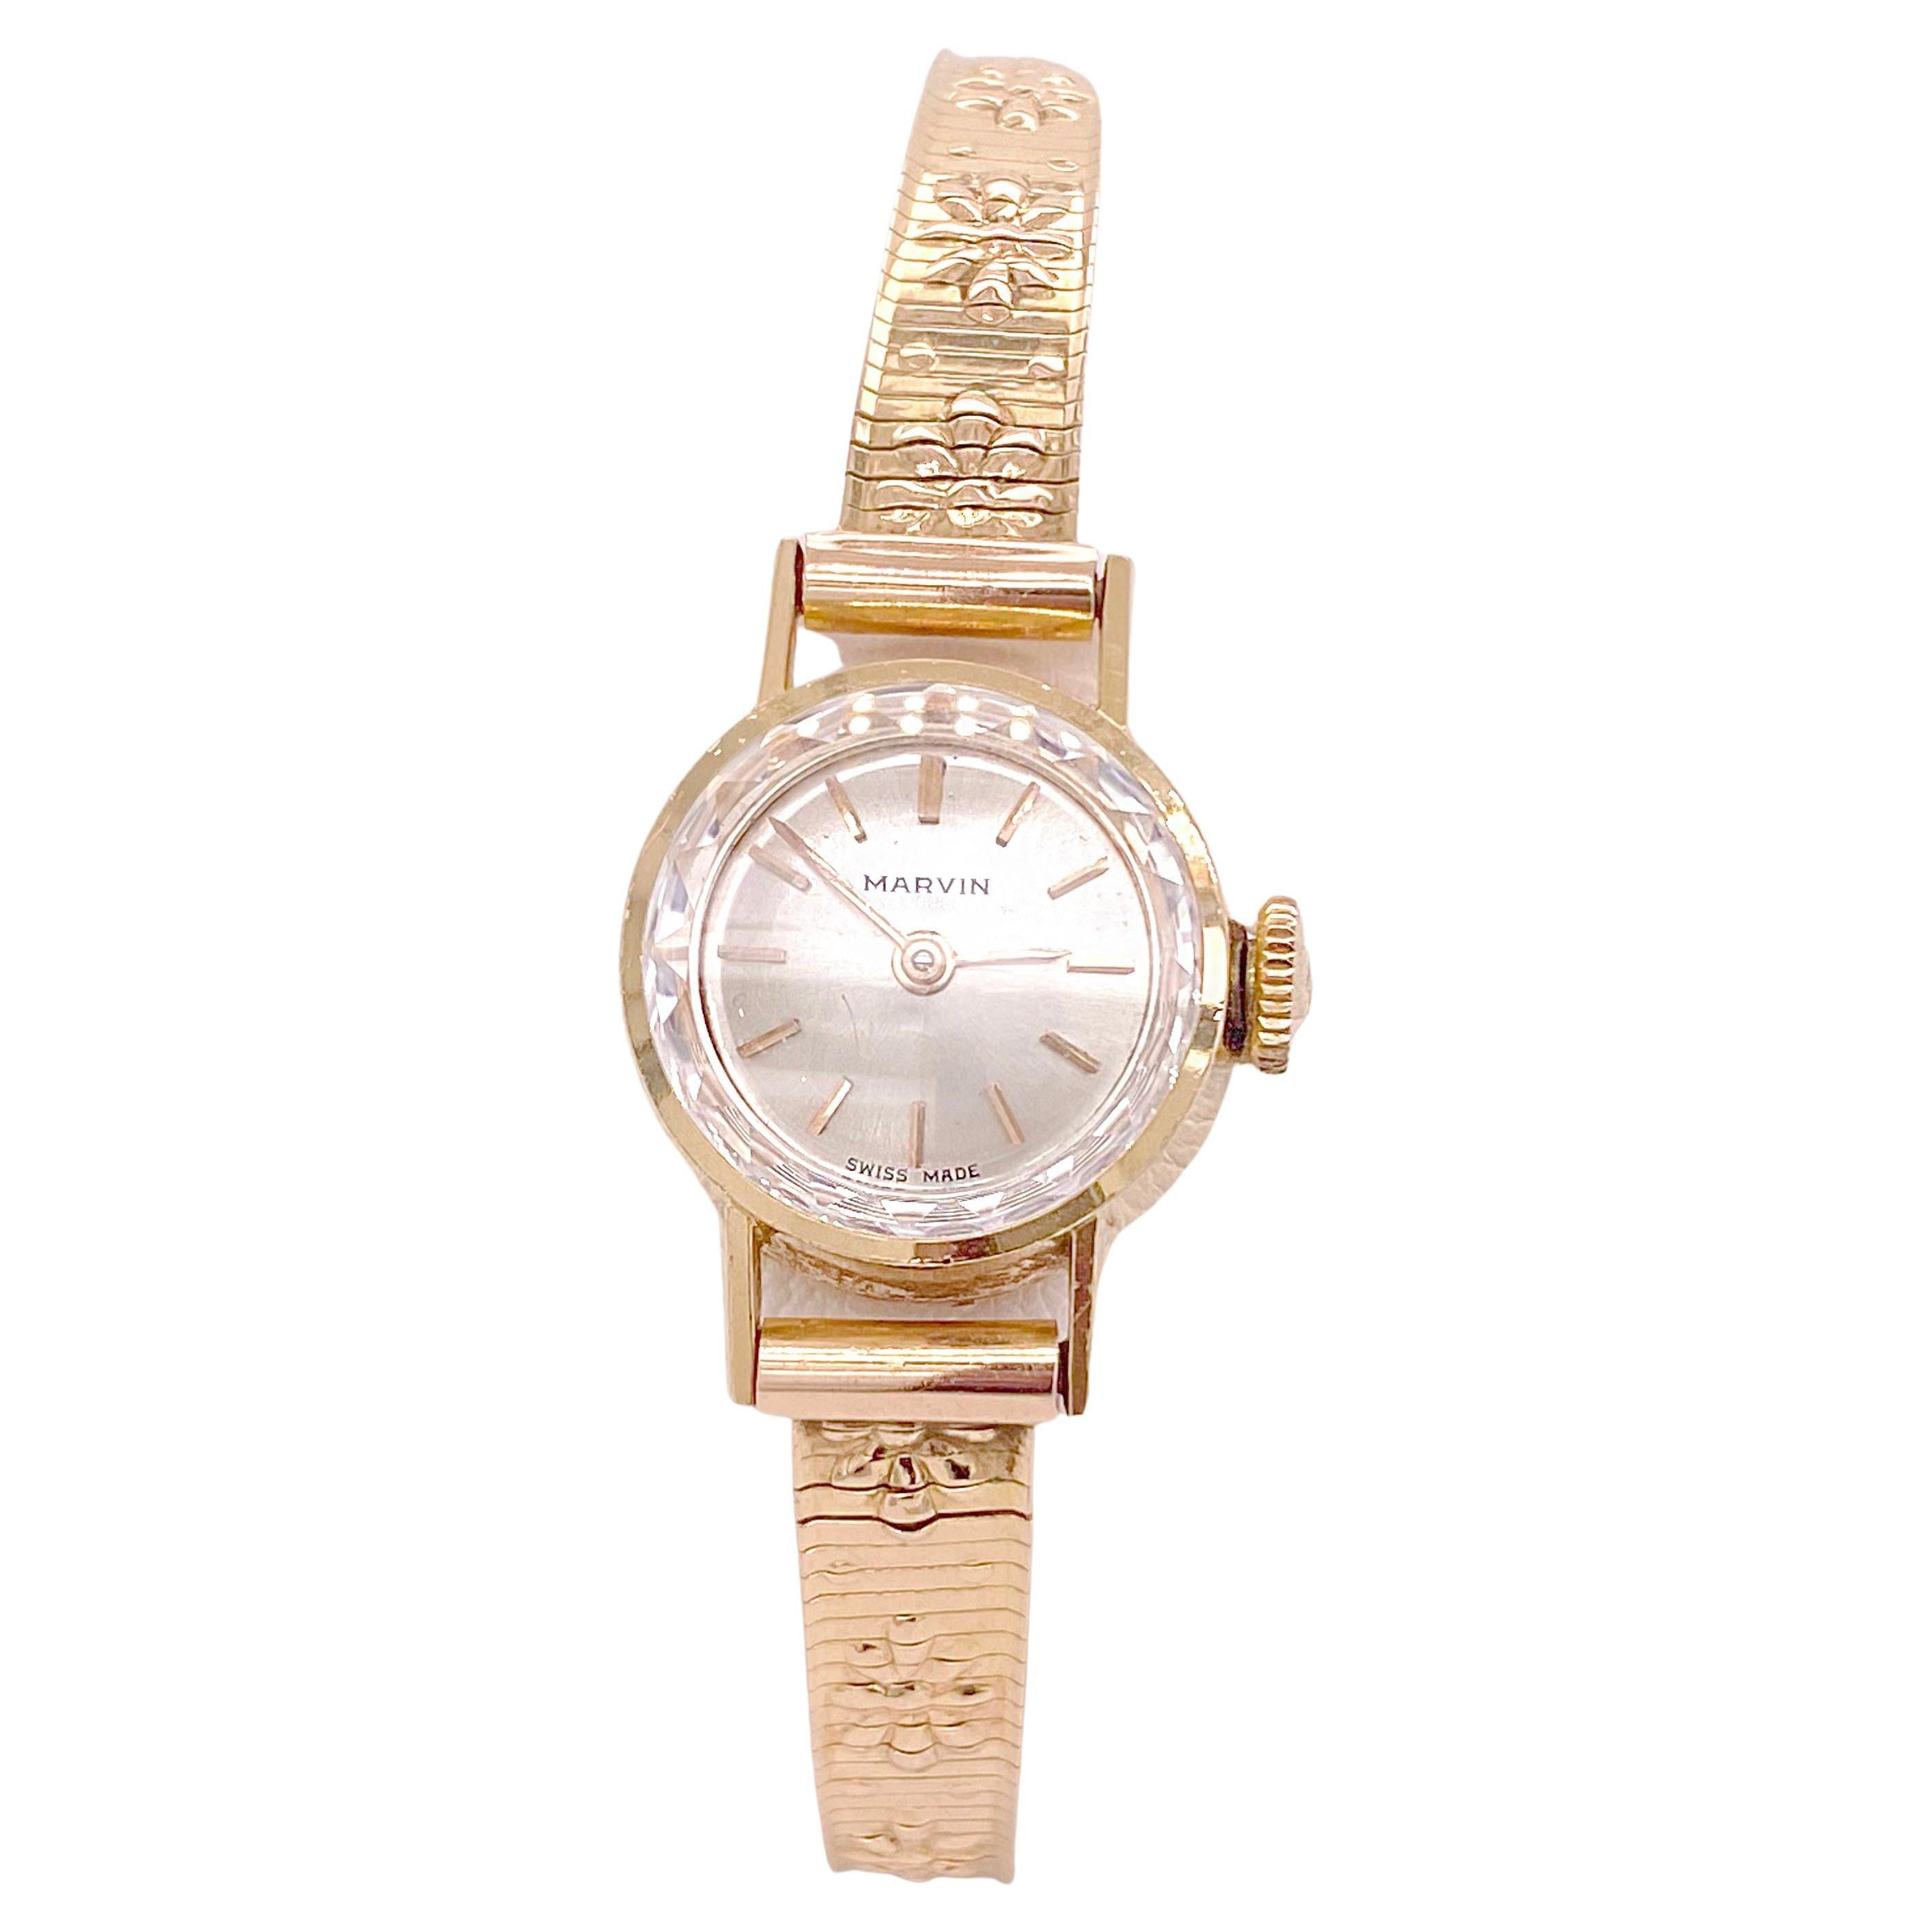 Ladies Dress Watch Marvin Brand, Floral Band and Round Dial, Circa 1945 14k Gold